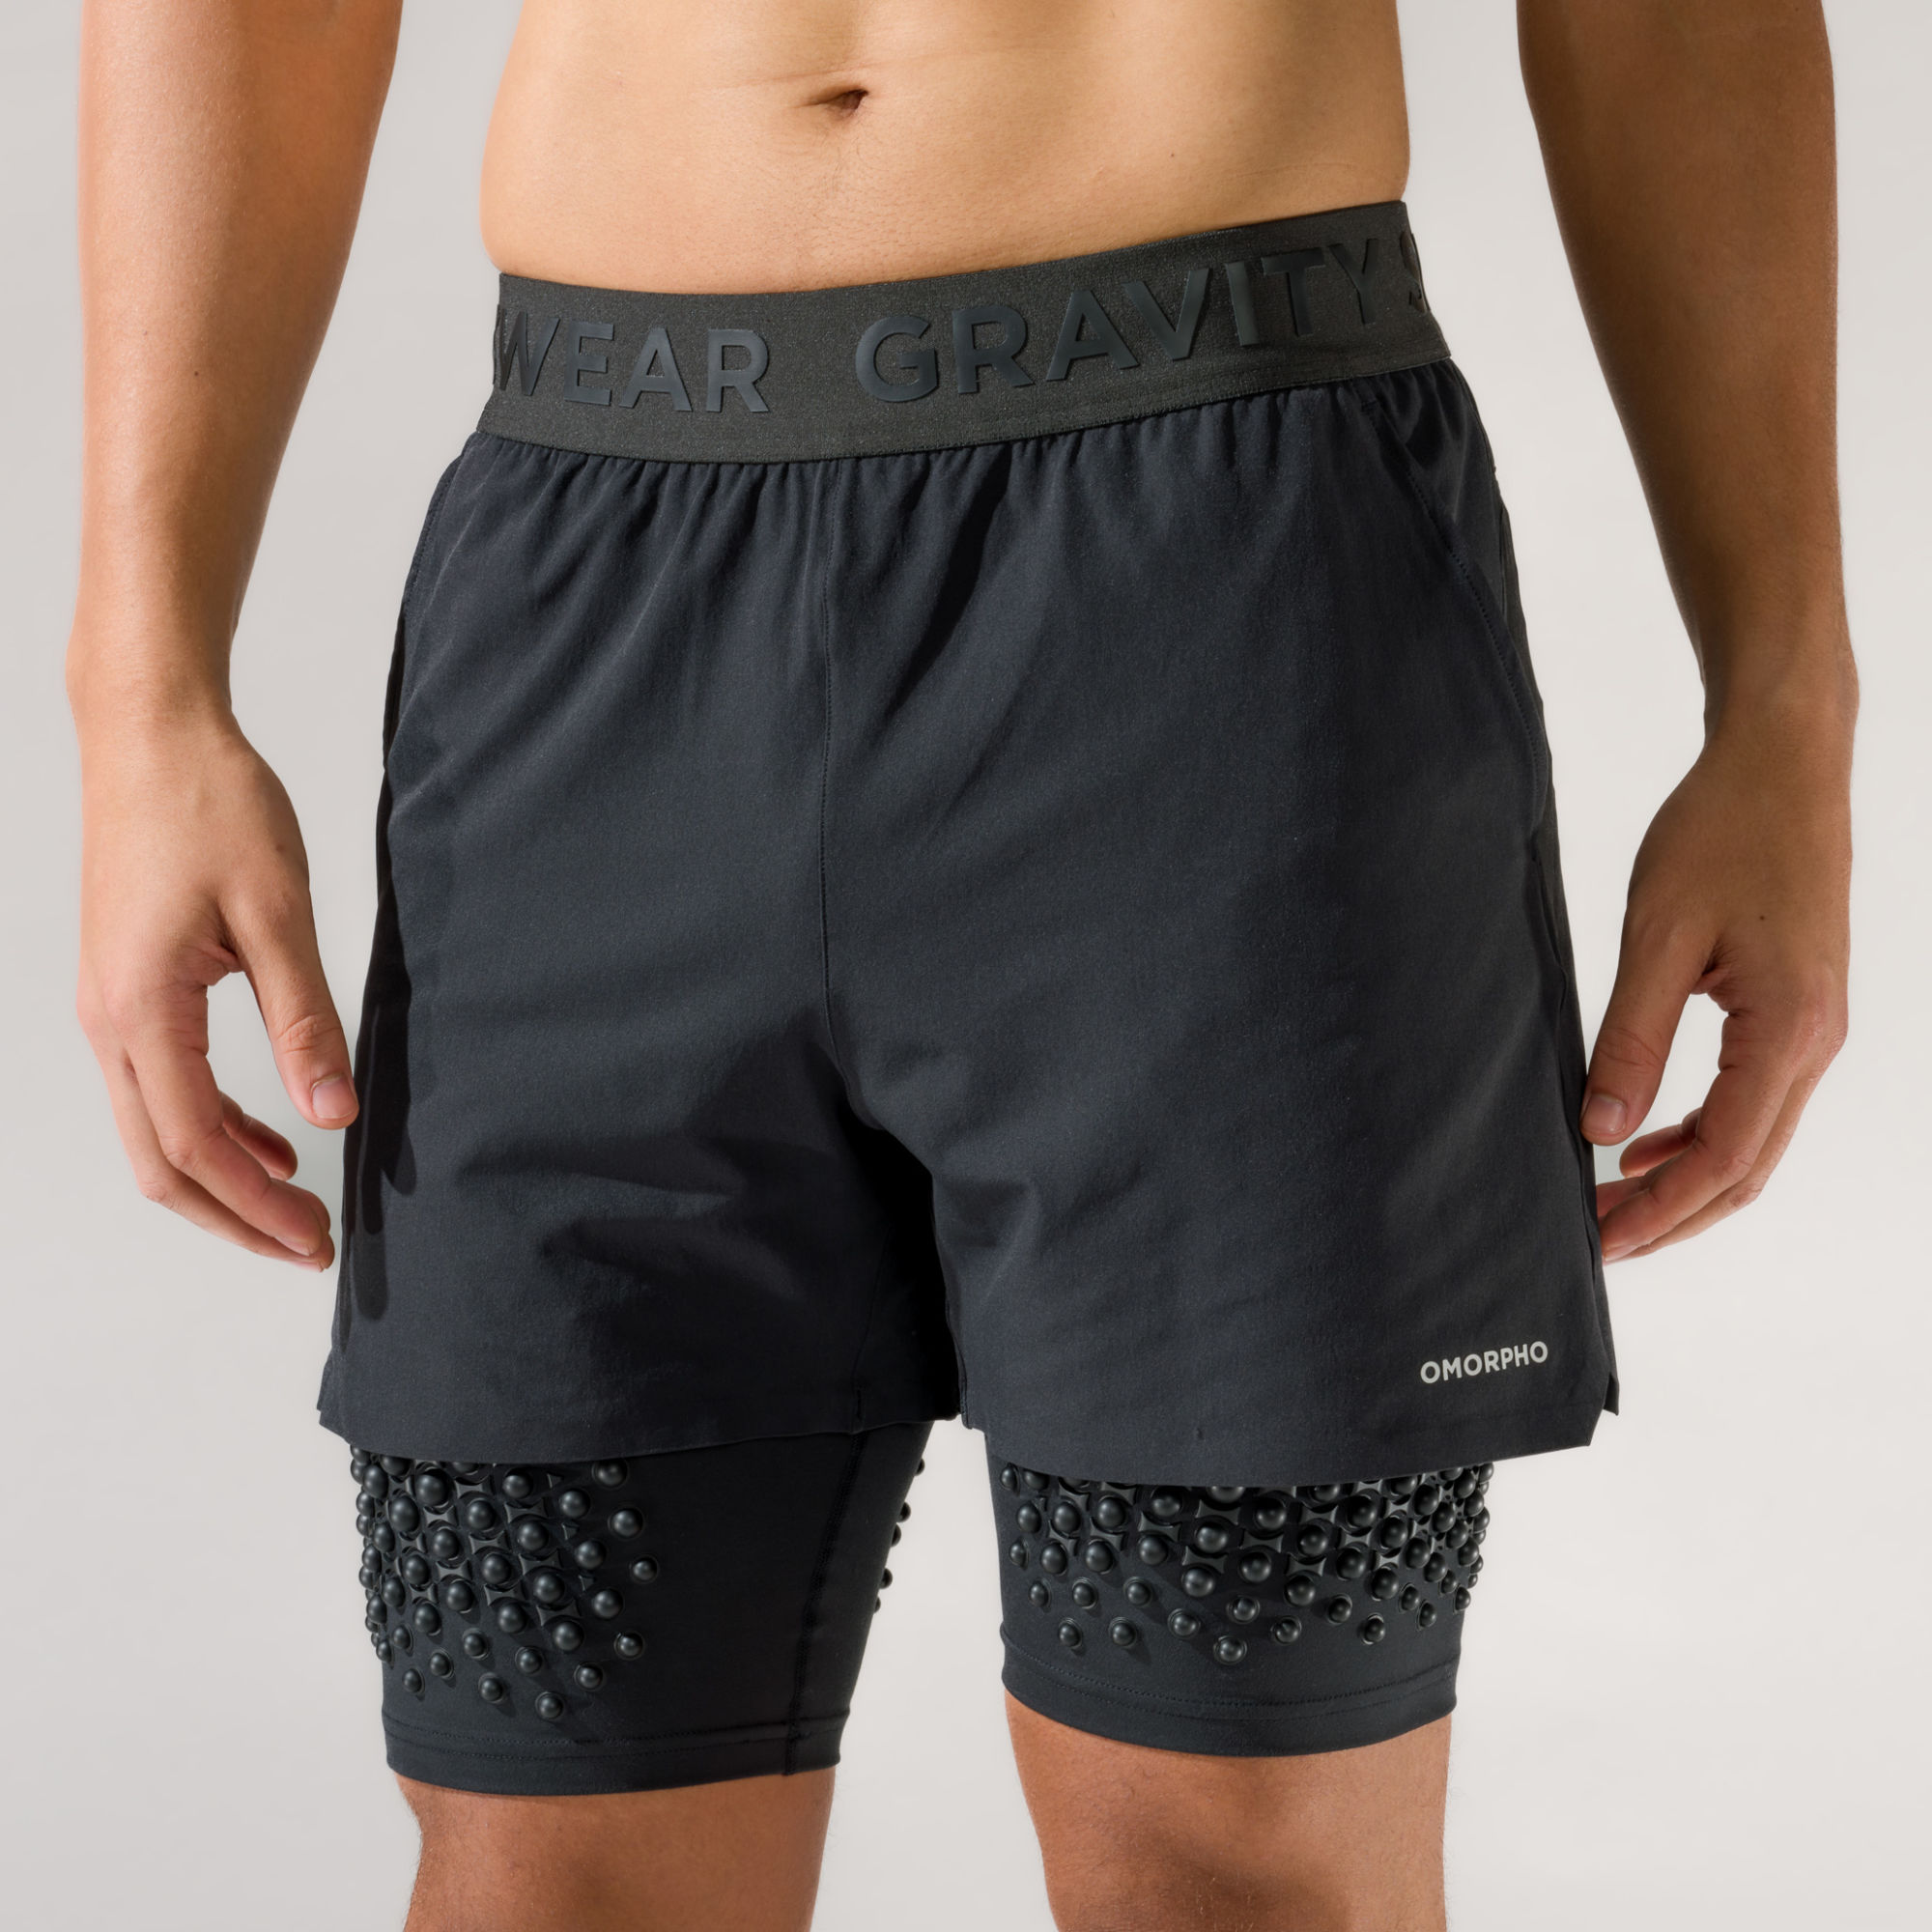 OMORPHO M G-Short Black weighted workout shorts - front view